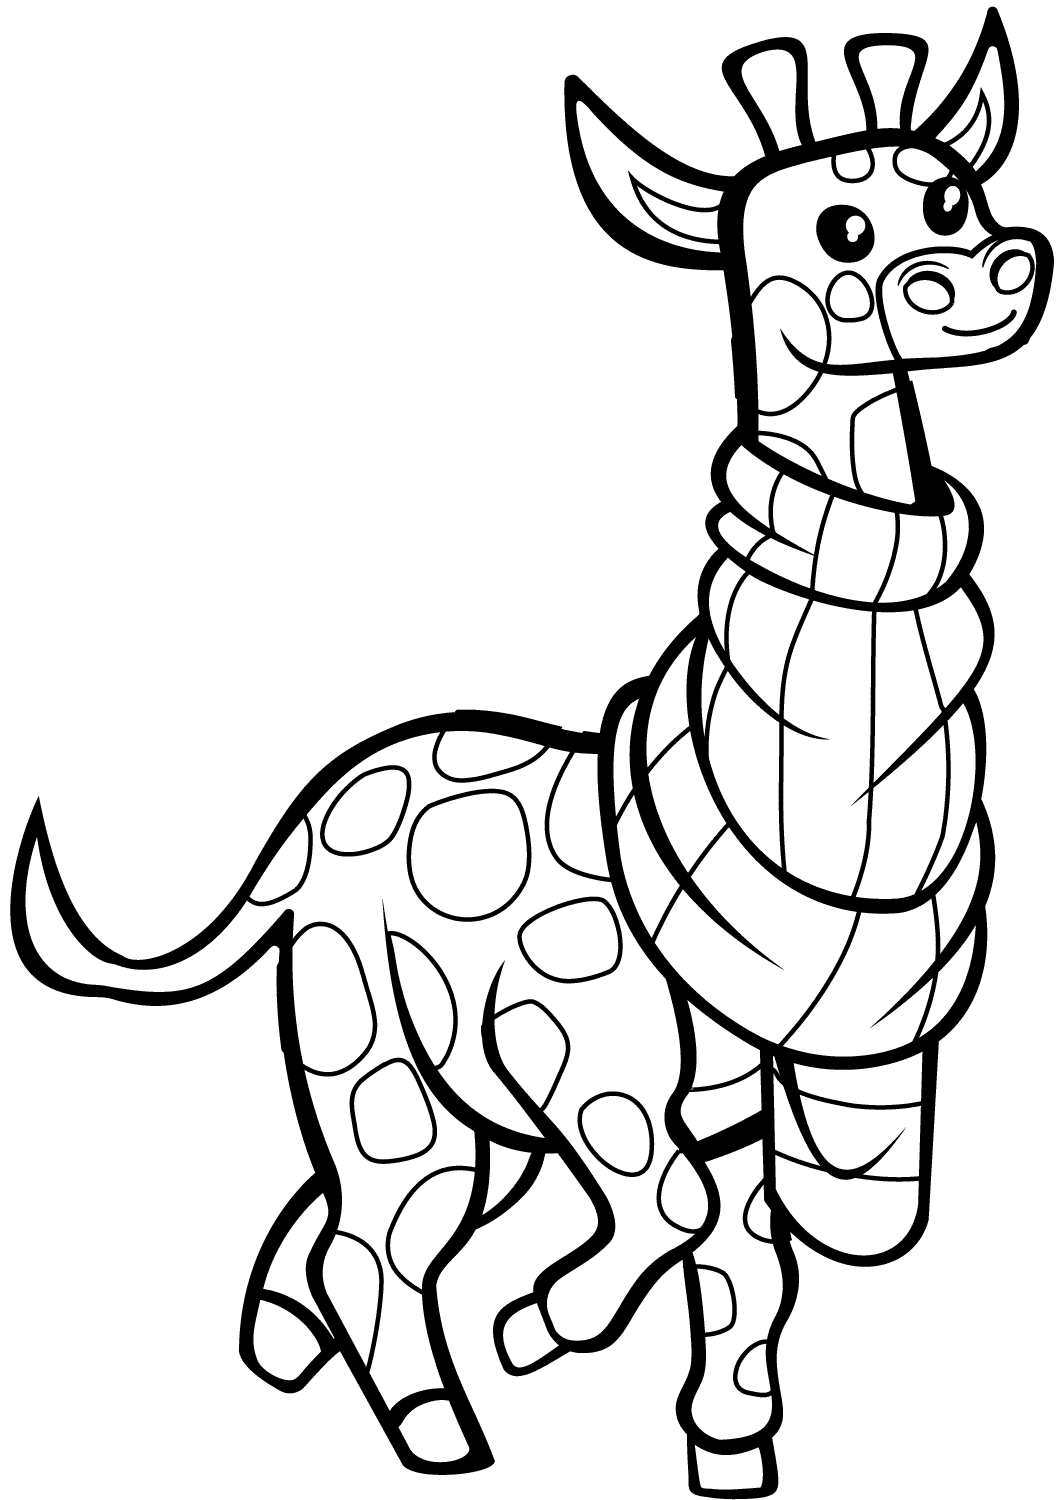 Giraffe With Scarf Coloring Pages